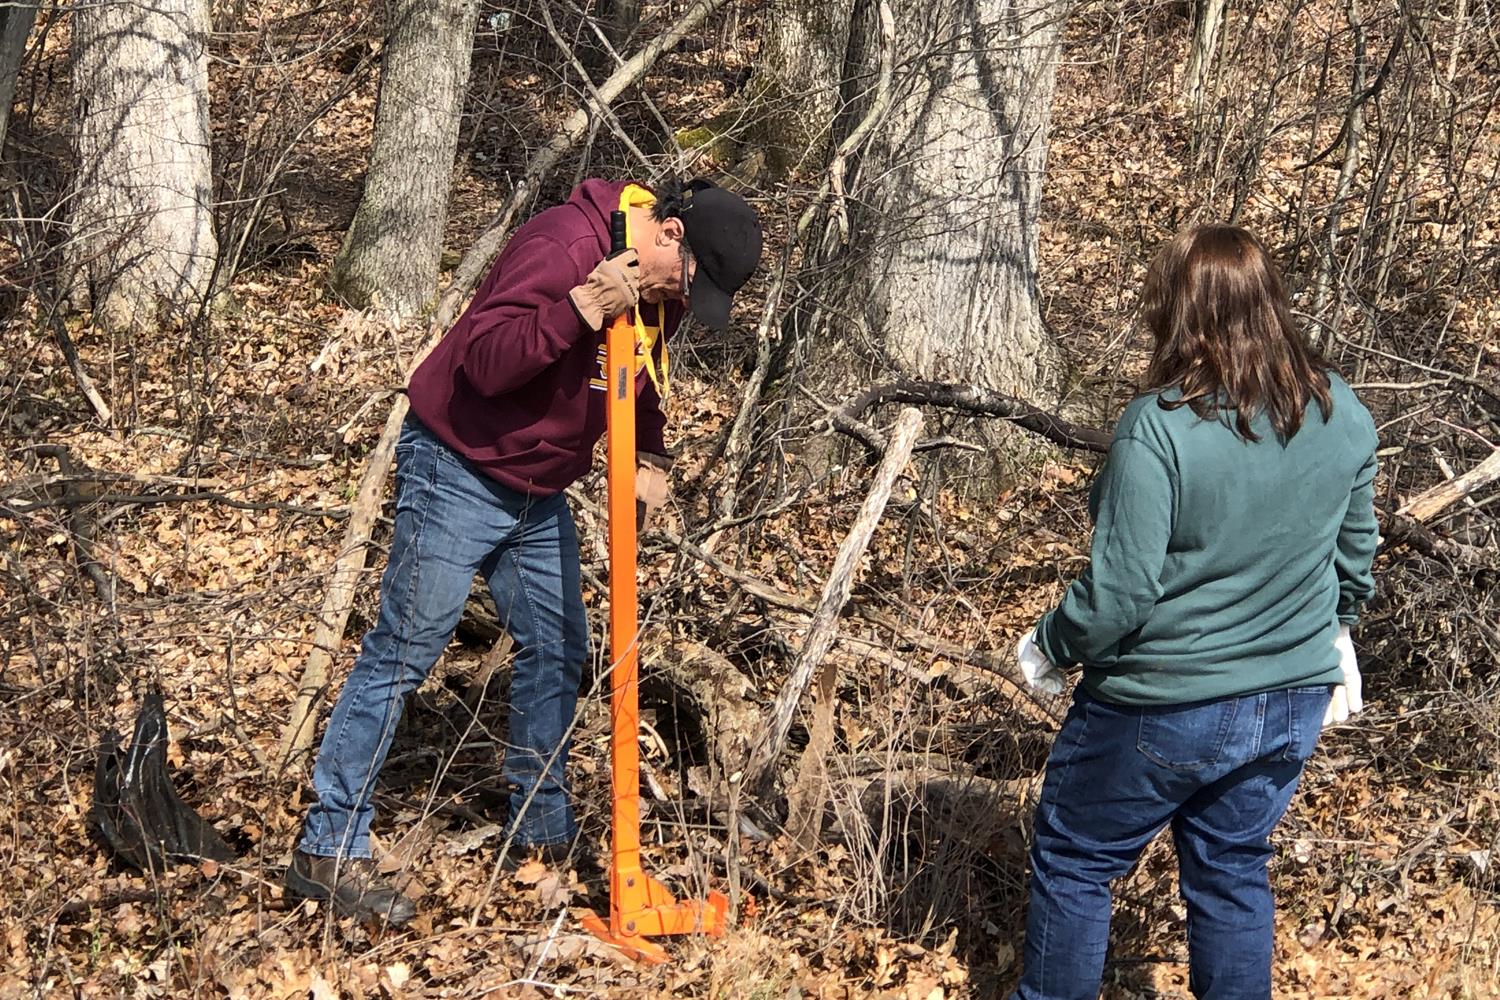 Rotarians and their families celebrated Earth Day 2022 by eradicating invasive plant species near the creek bed at West Midland Family Center.